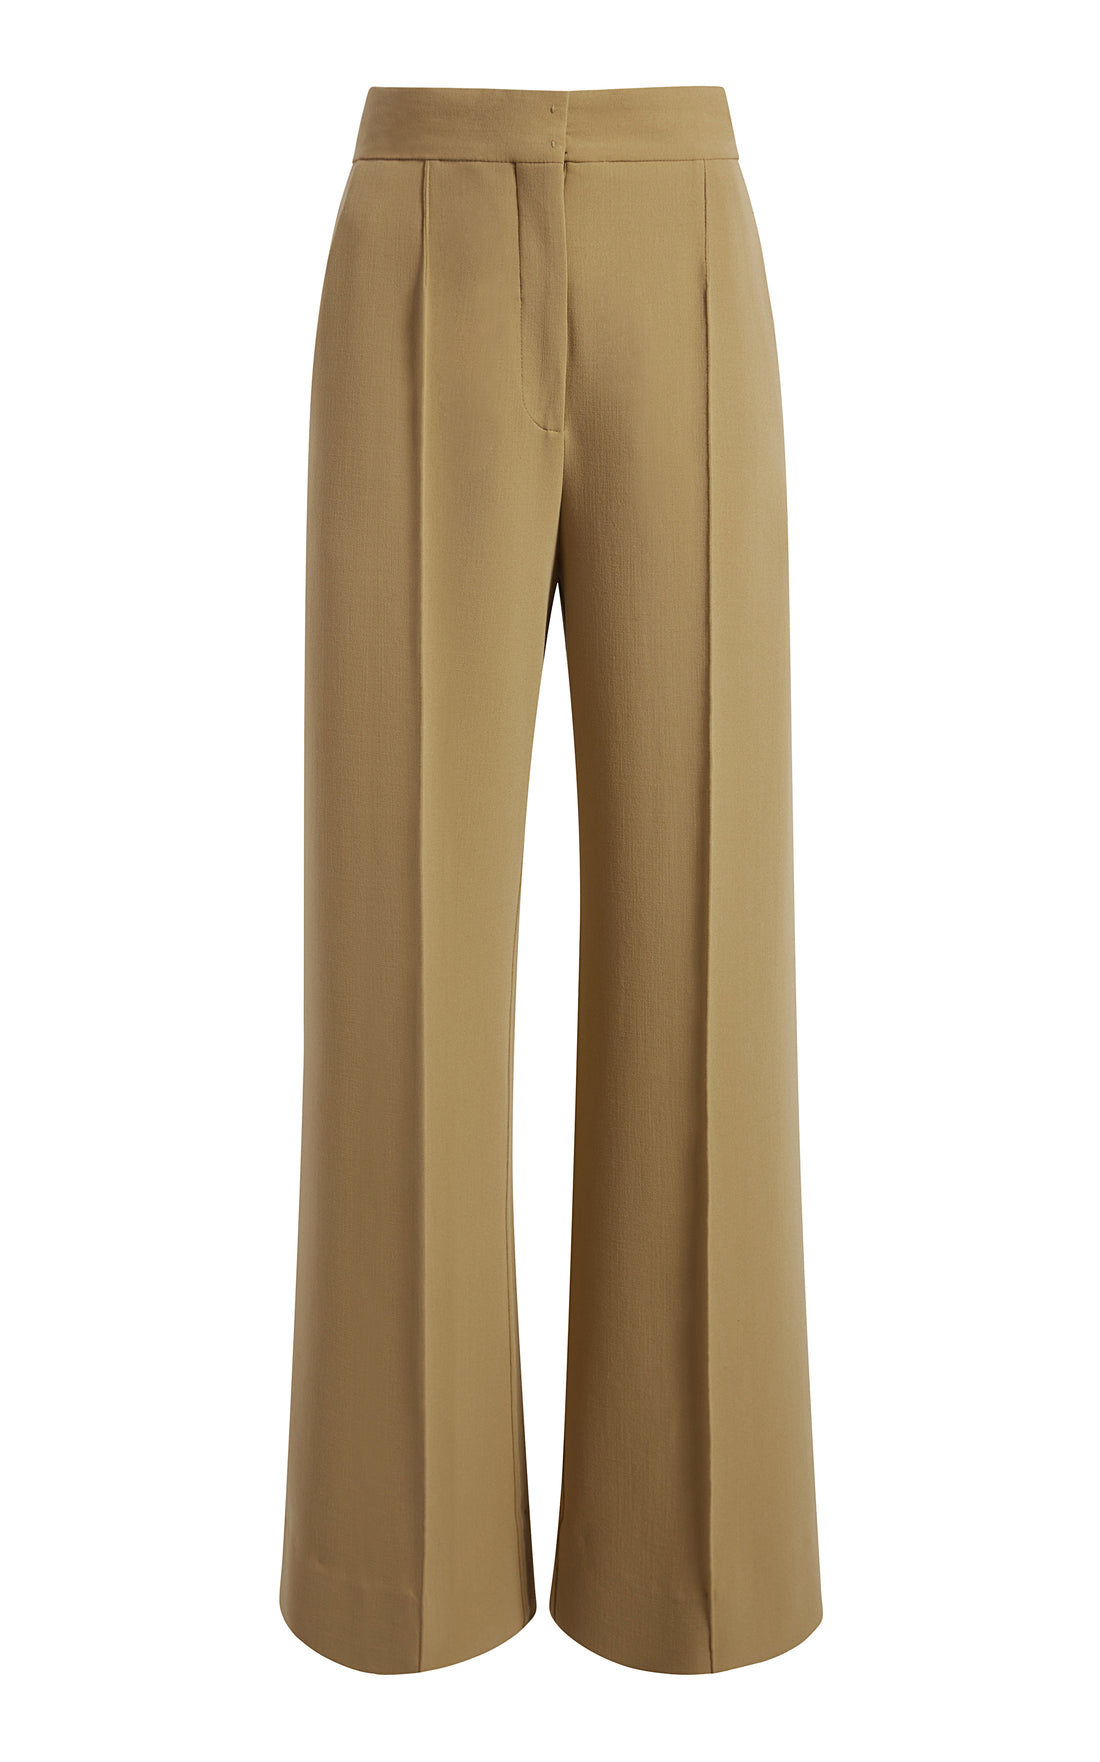 Tall Tan Suede Low Rise Straight Leg Pants